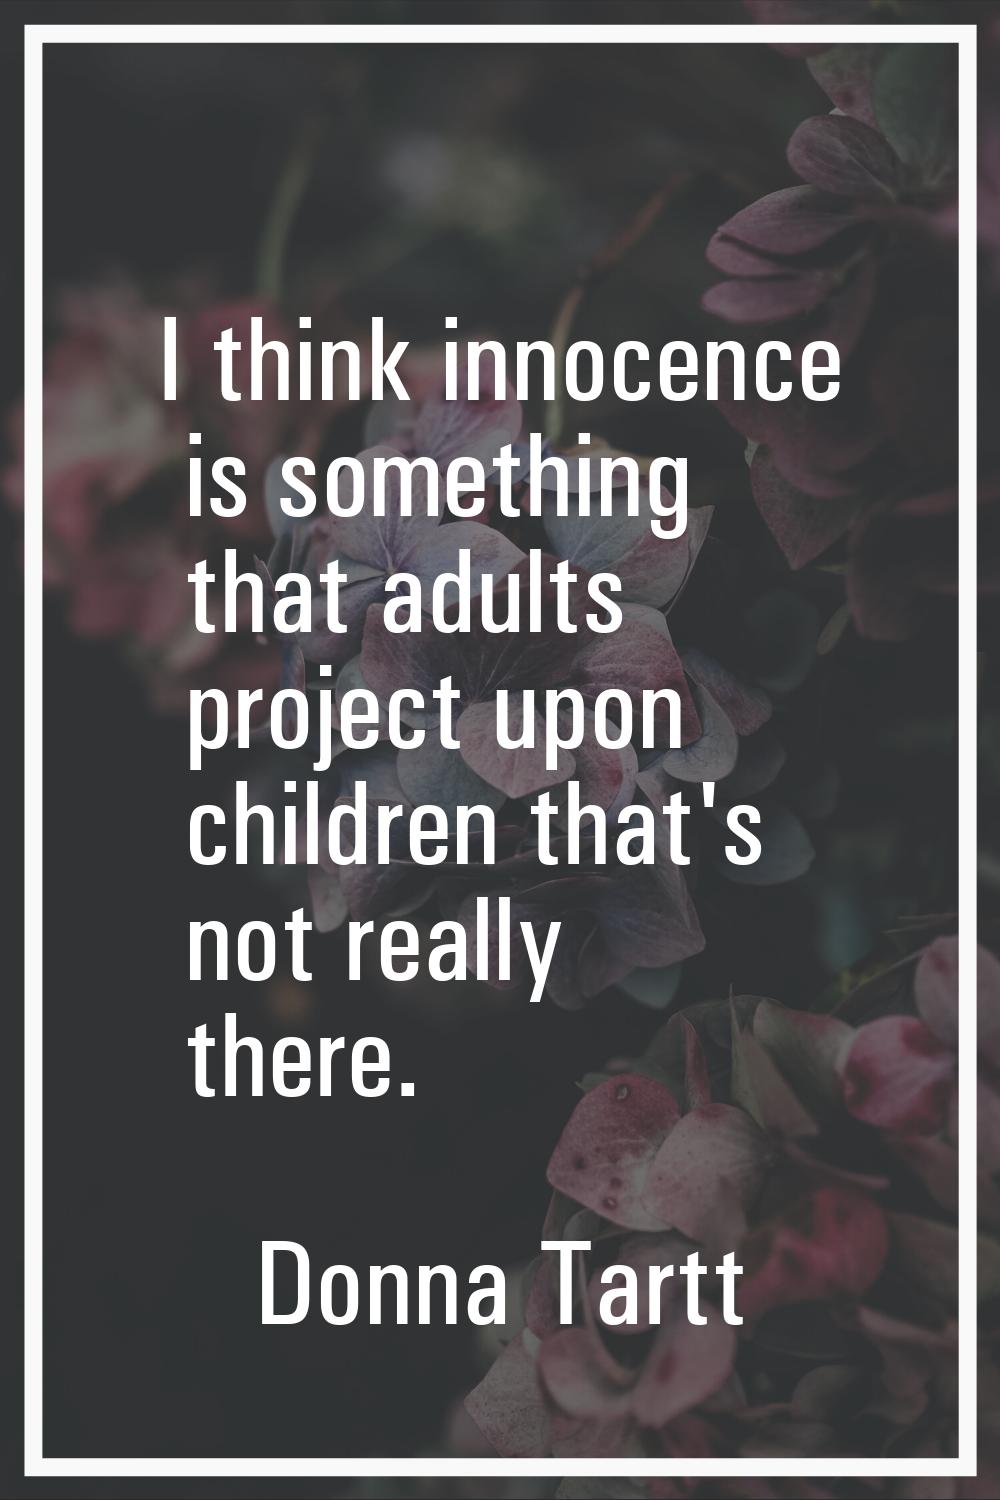 I think innocence is something that adults project upon children that's not really there.